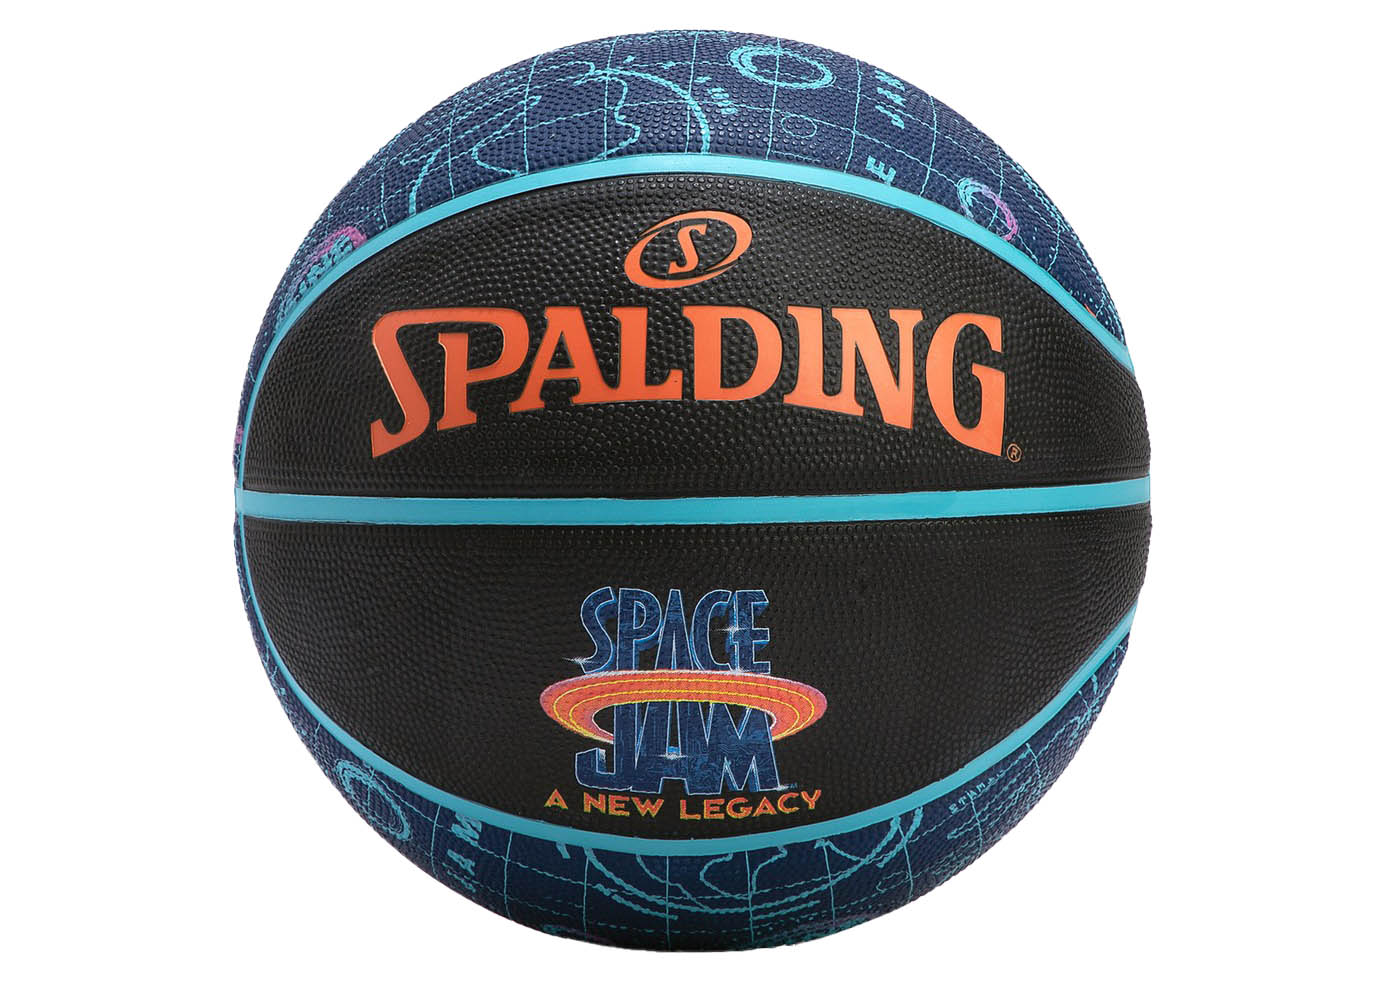 Spalding x Space Jam A New Legacy Tune Squad Basketball Black Blue